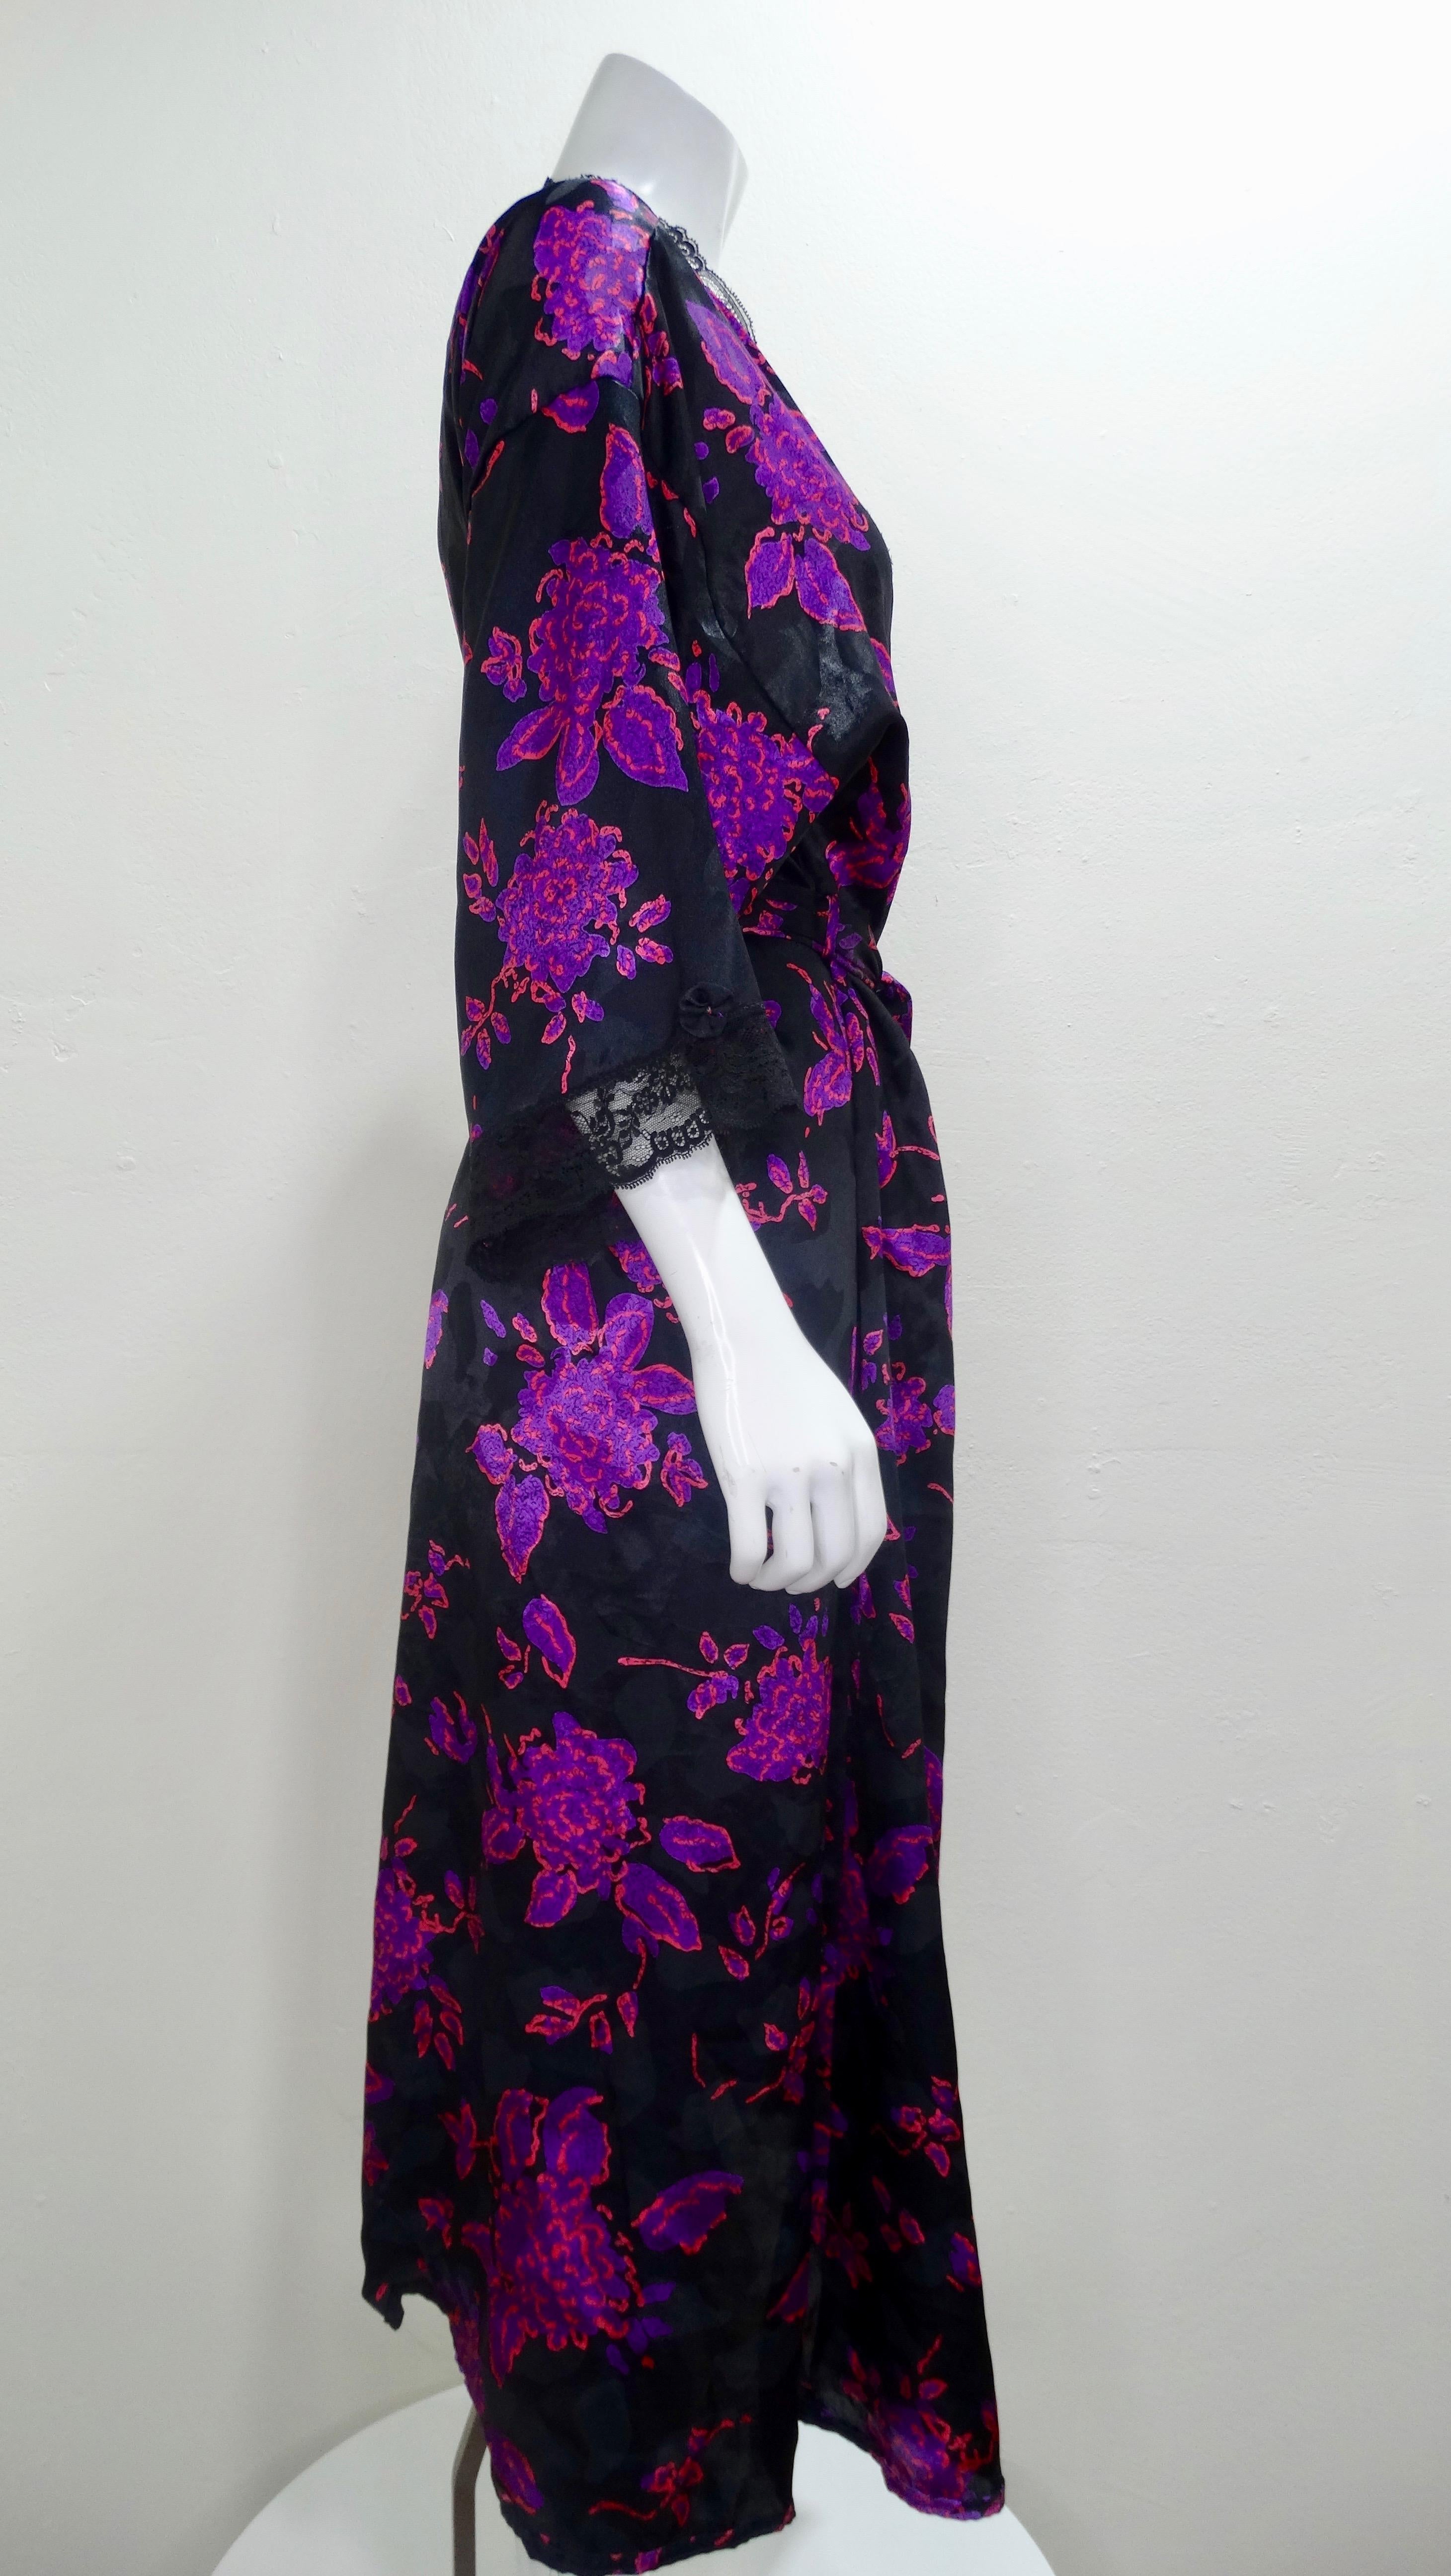 Whether you're going out or staying in, this Dior is for you! Circa 1980s, this black Silk wrap robe features a vibrant purple and pink abstract floral pattern with black lace trim. Sexy and chic, this lingerie piece can be worn on an evening out